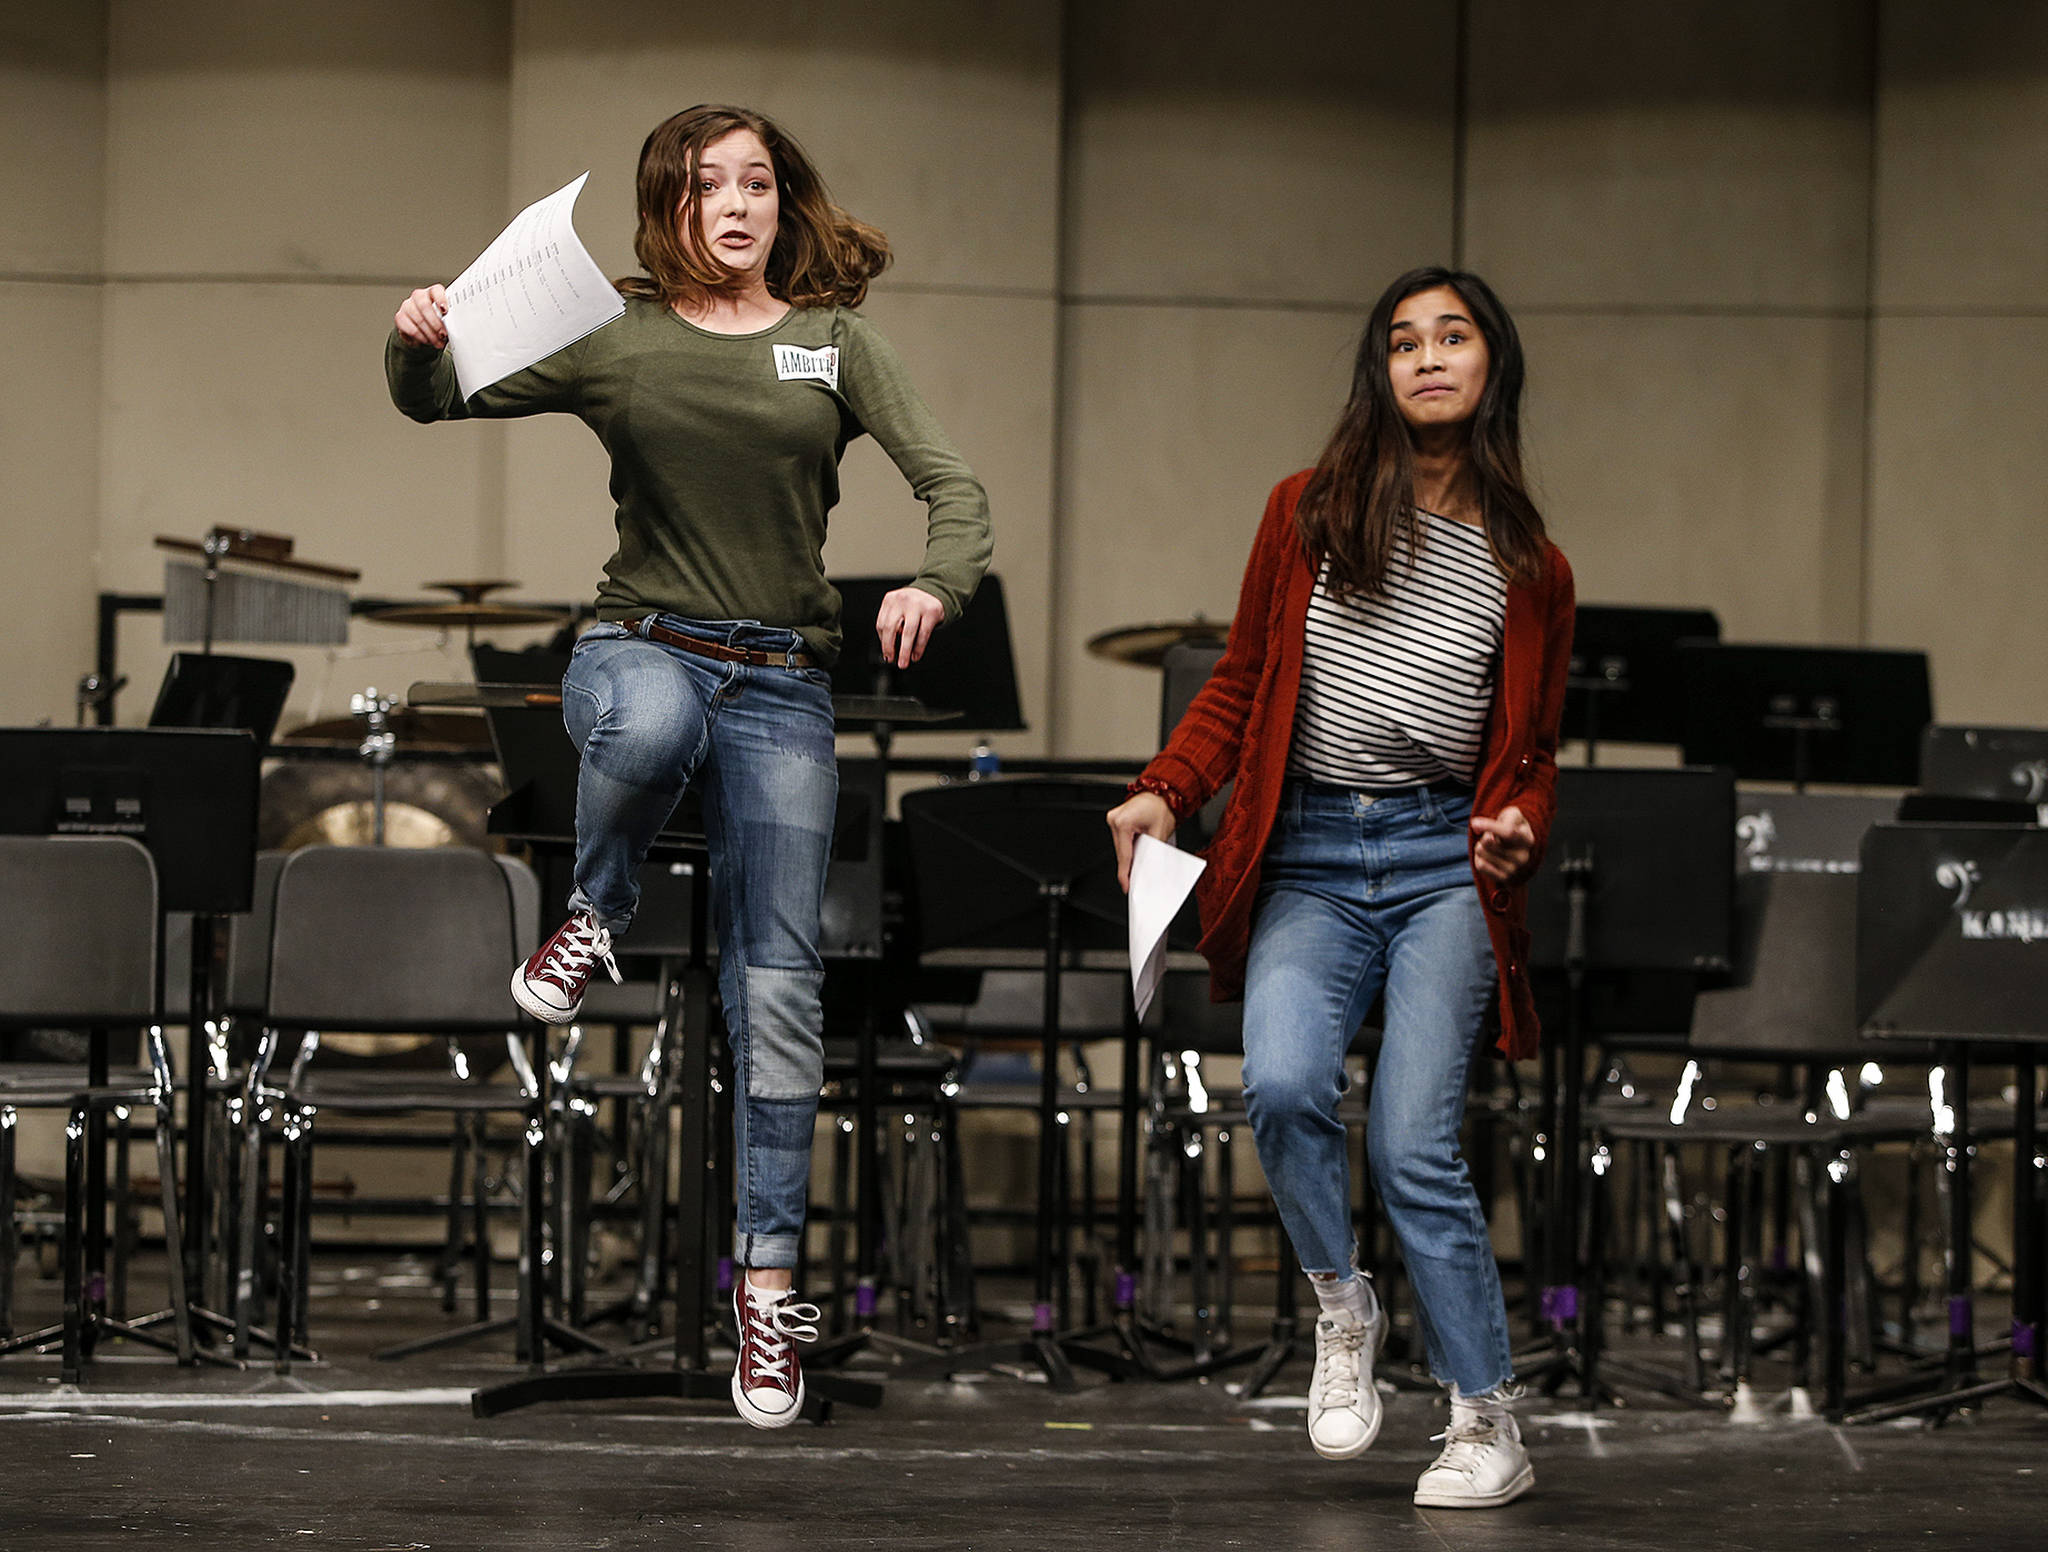 Kamiak students Paige Cox (left) and Lauren Bocalan do their best to enunciate their lines while also pretending to ride a horse during an audition for “Spamalot” at the Mukilteo school. Both were cast. (Ian Terry / The Herald)